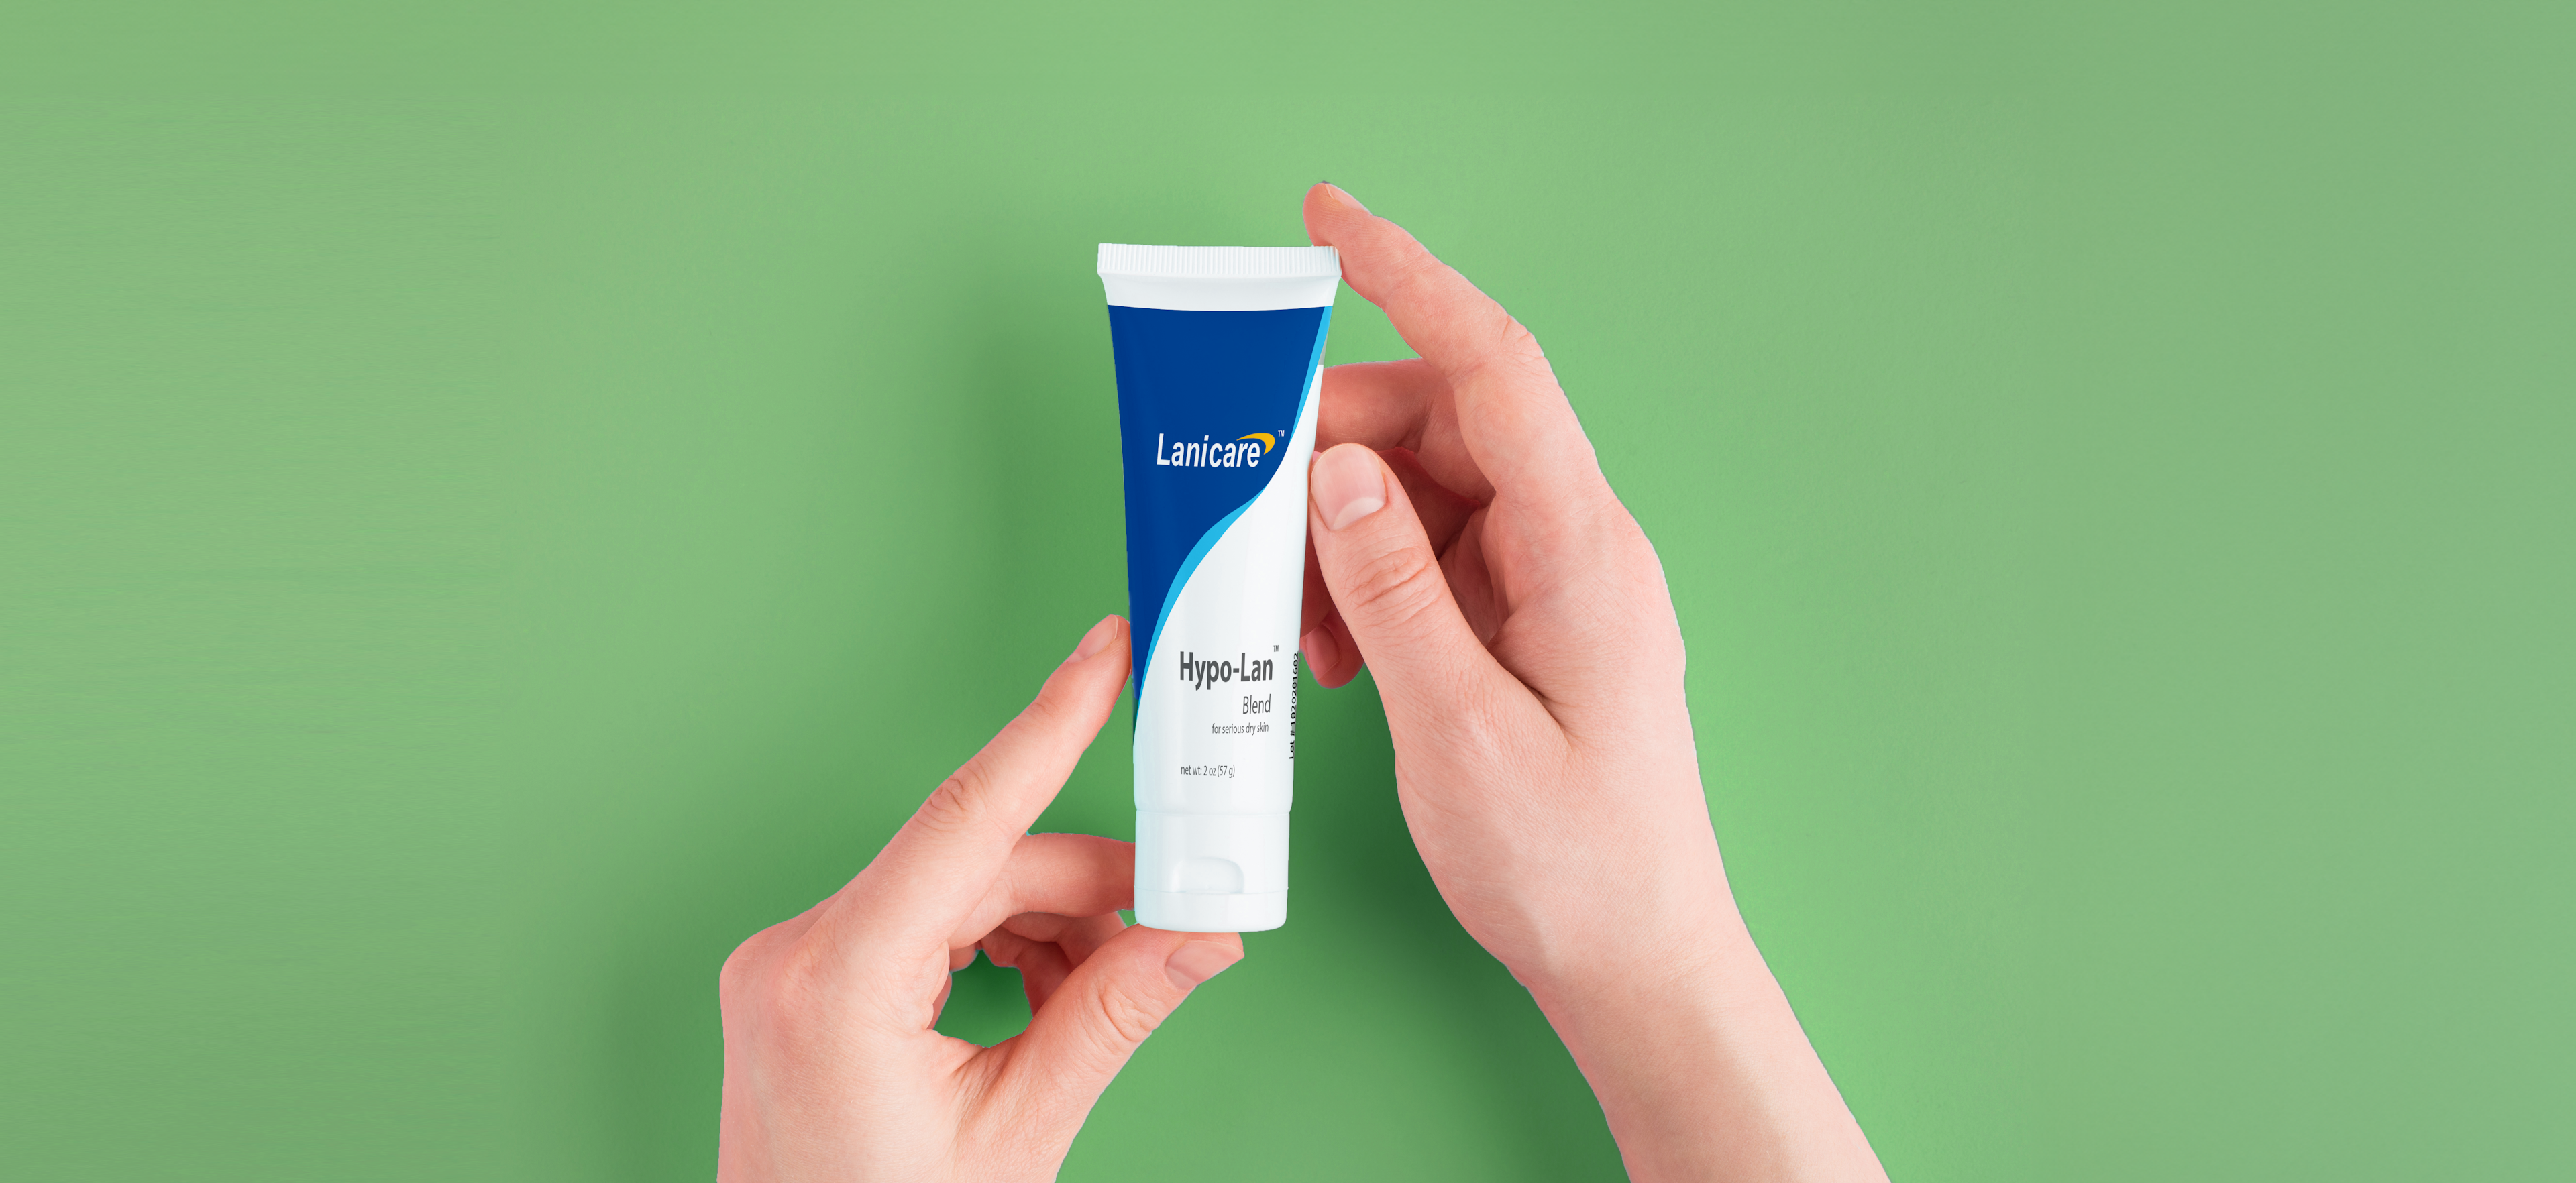 picture of the Laicare product on a colorful backdrop